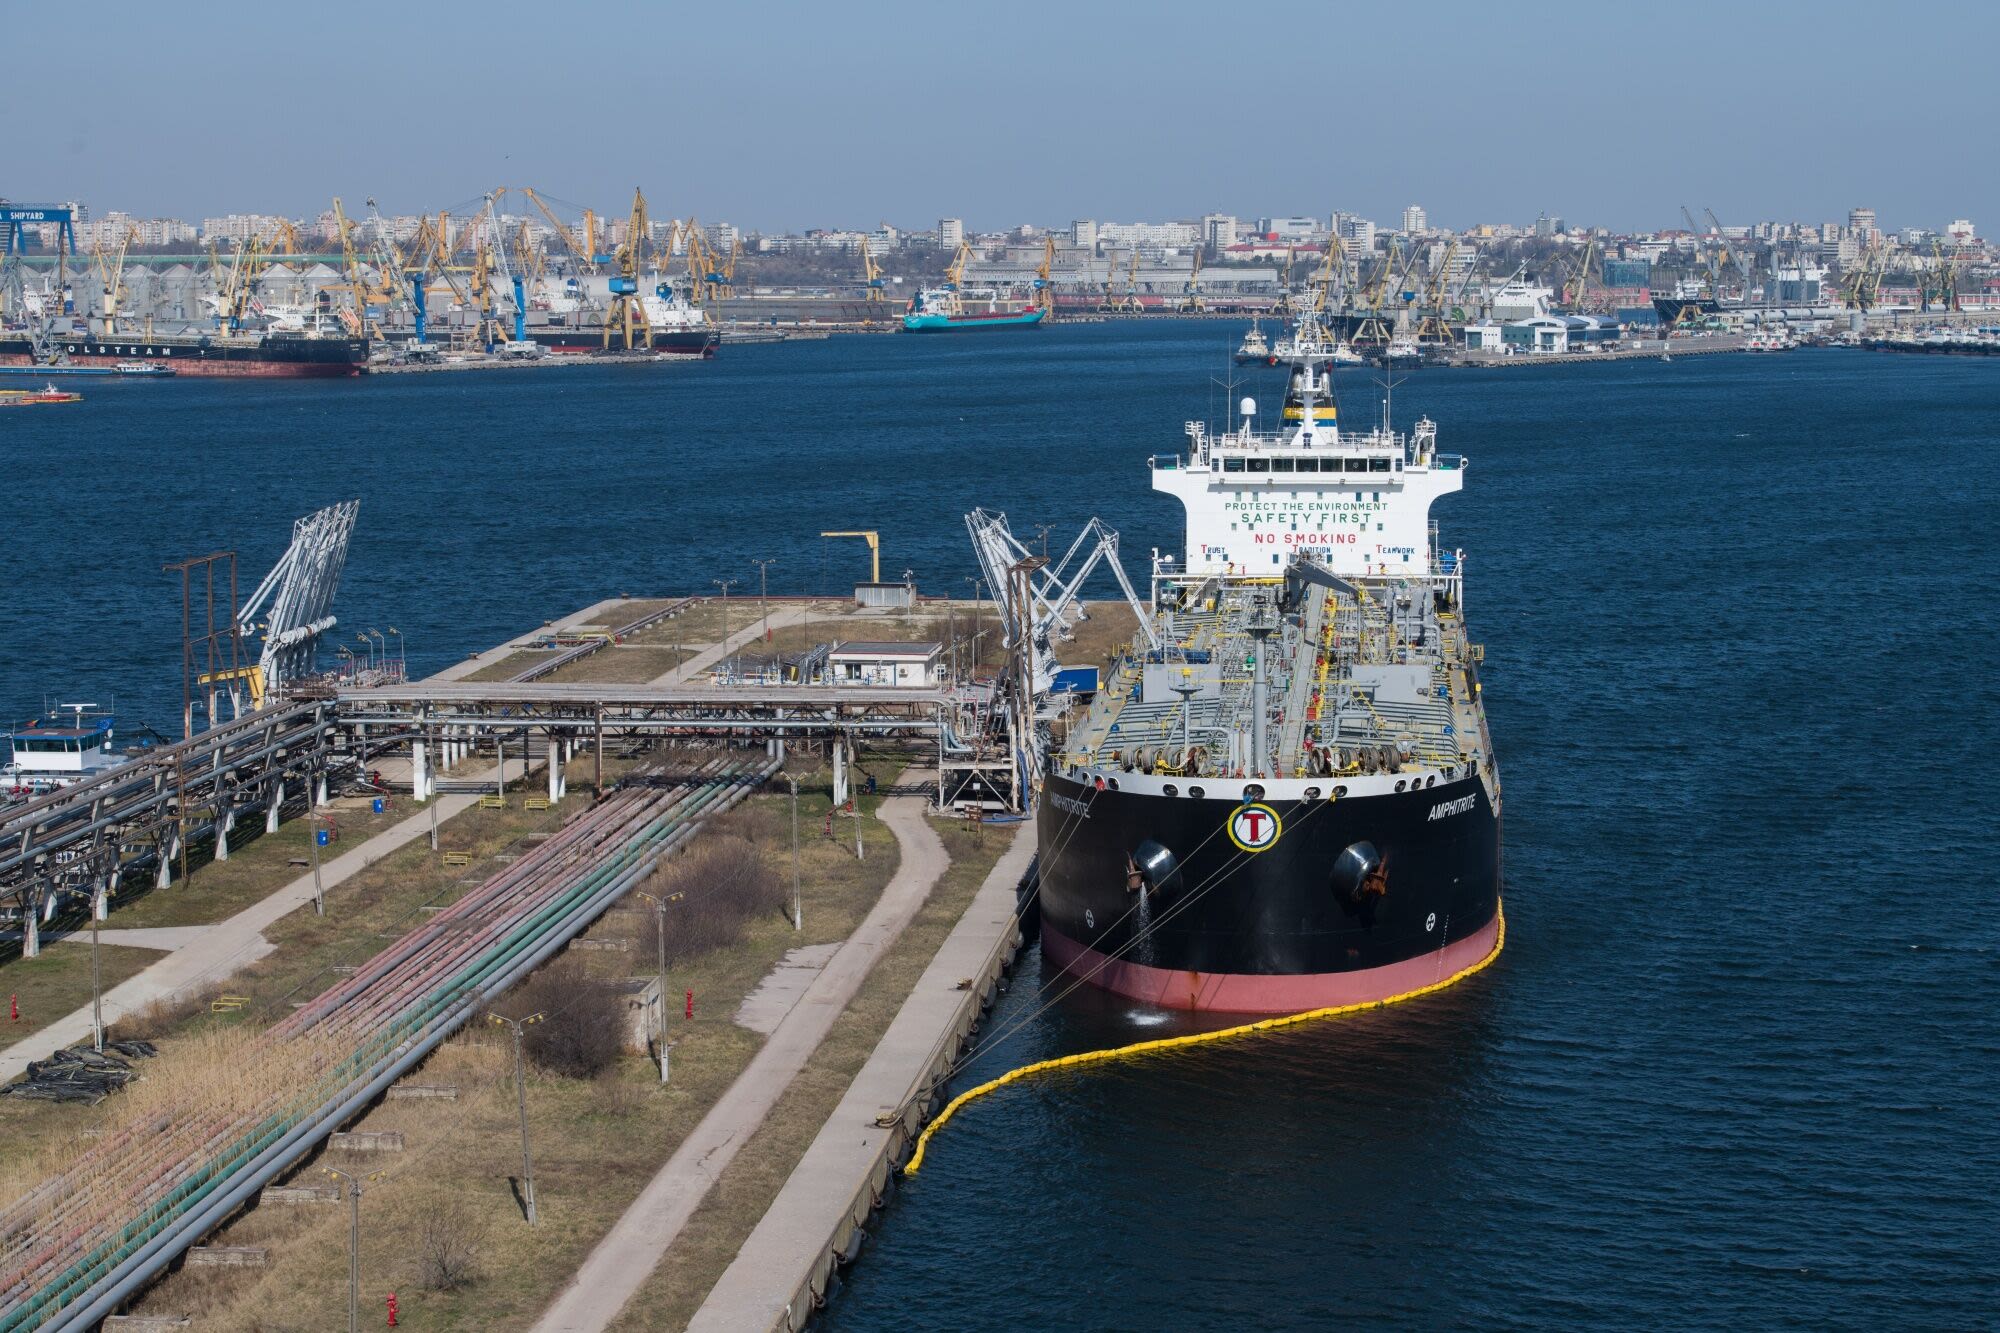 Virtually Every Sanctioned Russian Oil Tanker Remains Idle and Empty Months After Sanctions